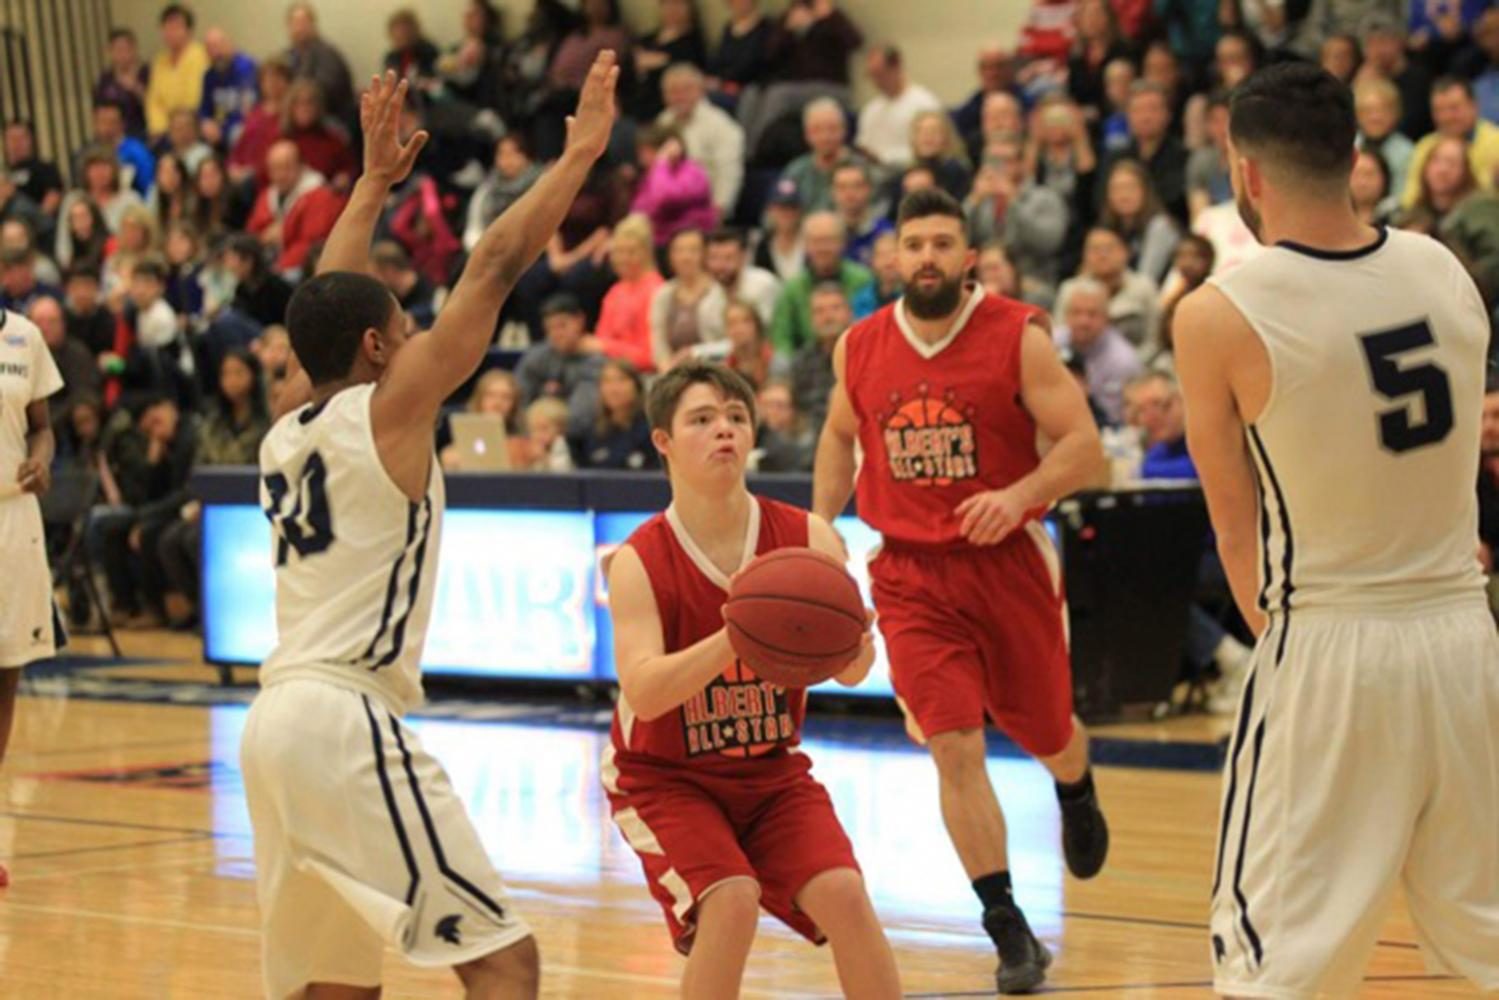 Freshman Bret Hammond prepares a shot during the All-Star basketball game. (photo submitted by James Hammond)